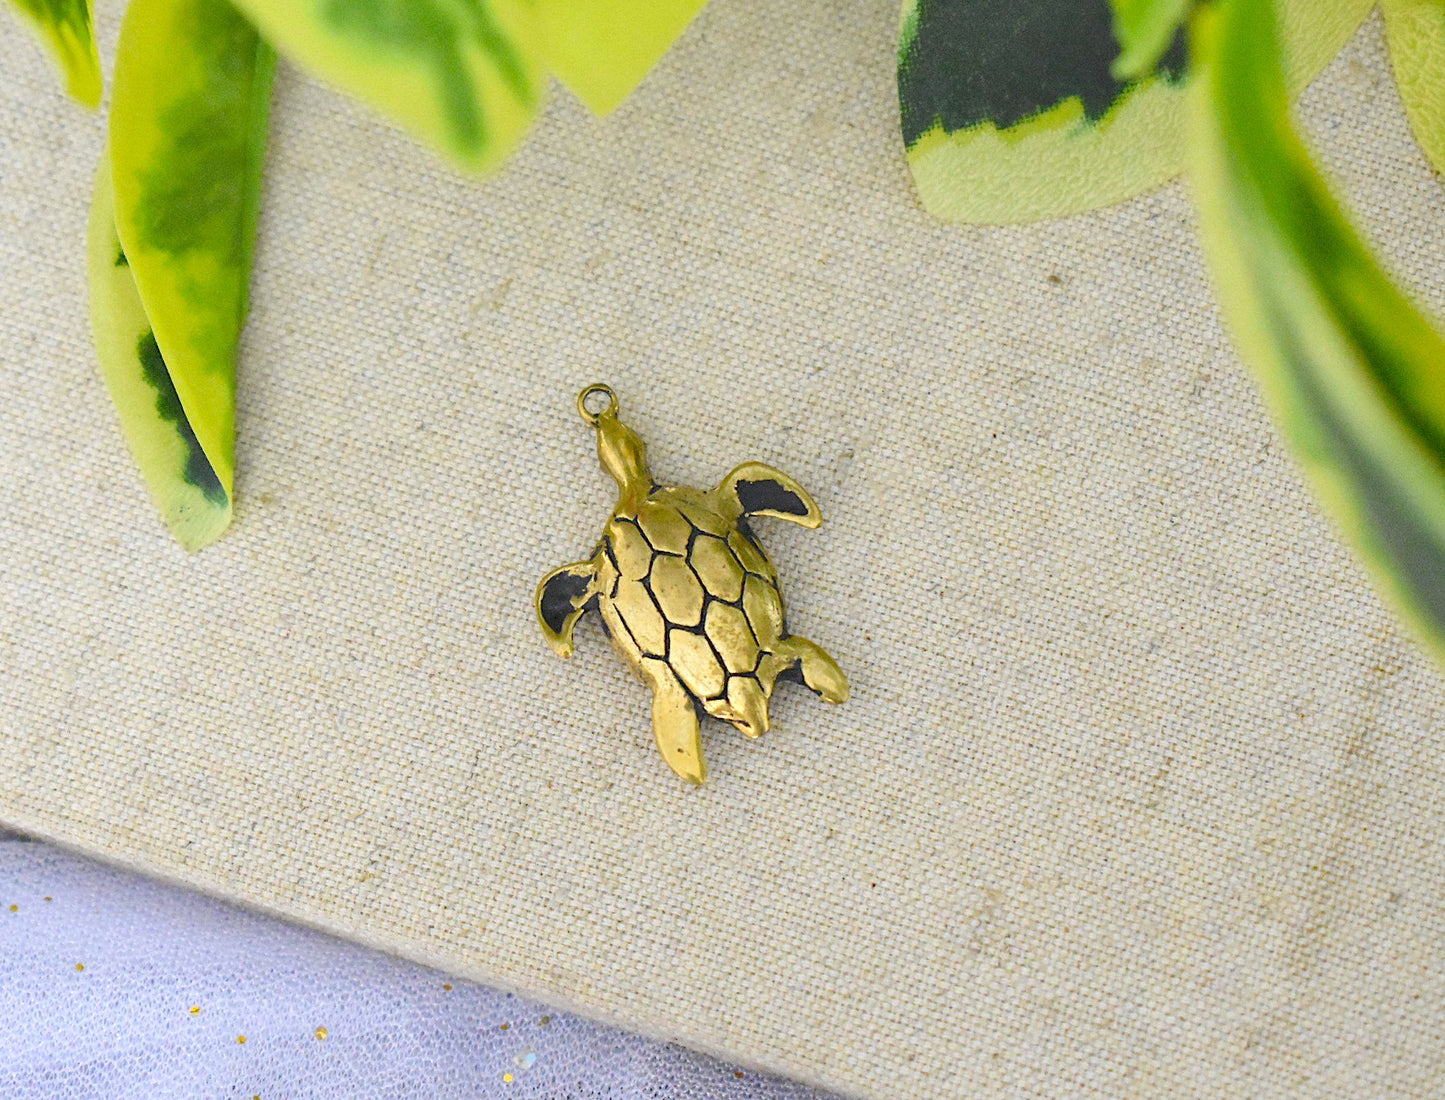 Turtle Chinese Luck I Ching Handmade Brass Necklace Pendant Jewelry